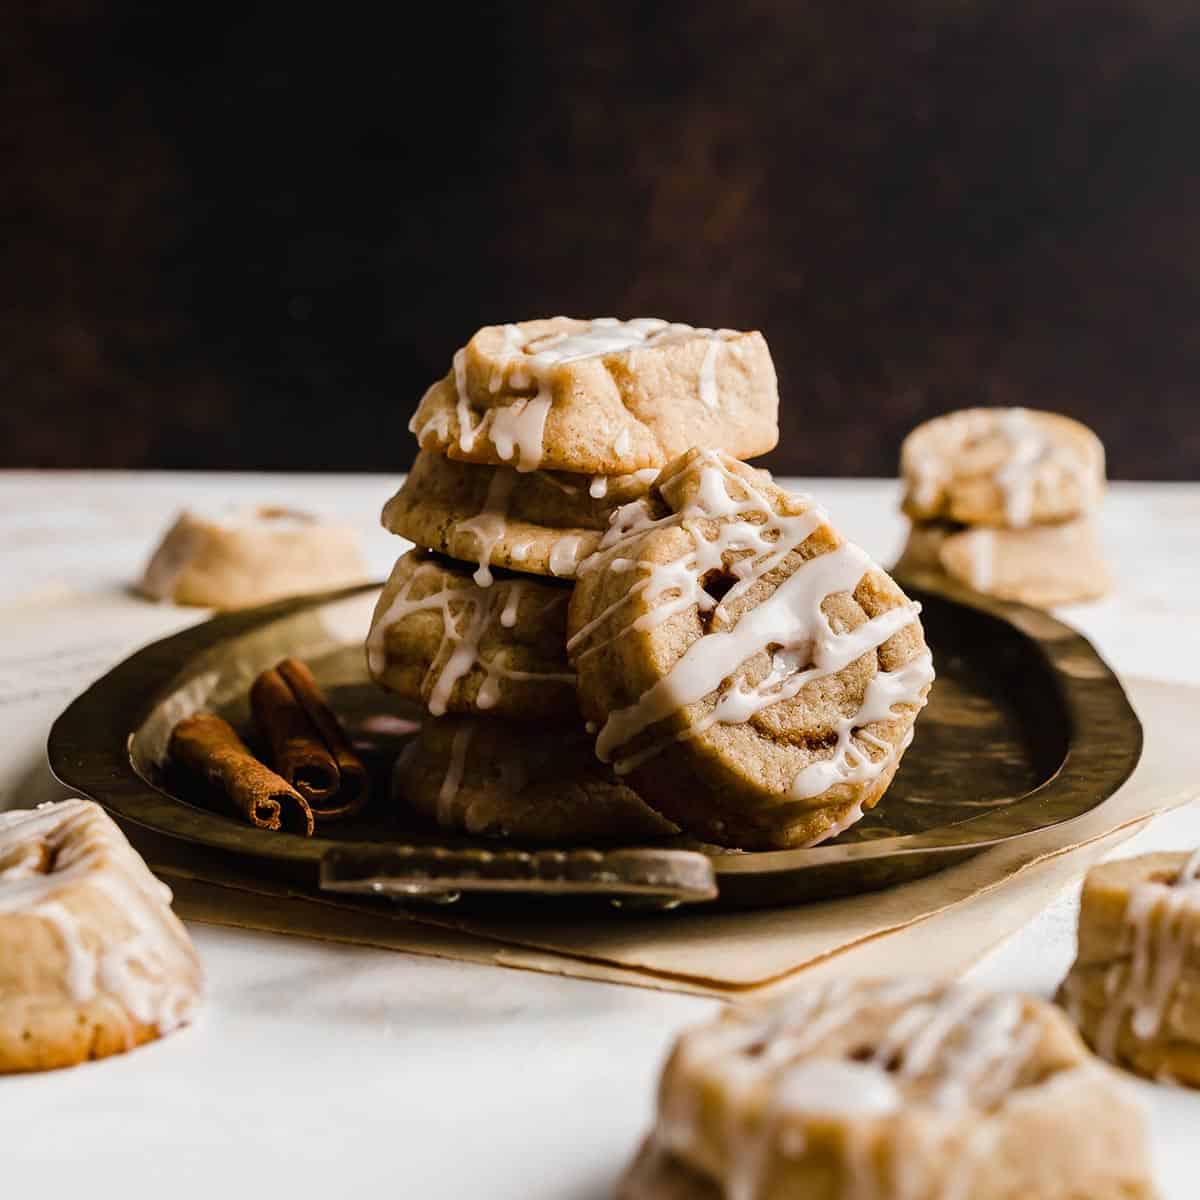 Cinnamon Roll Cookies against a brown background.